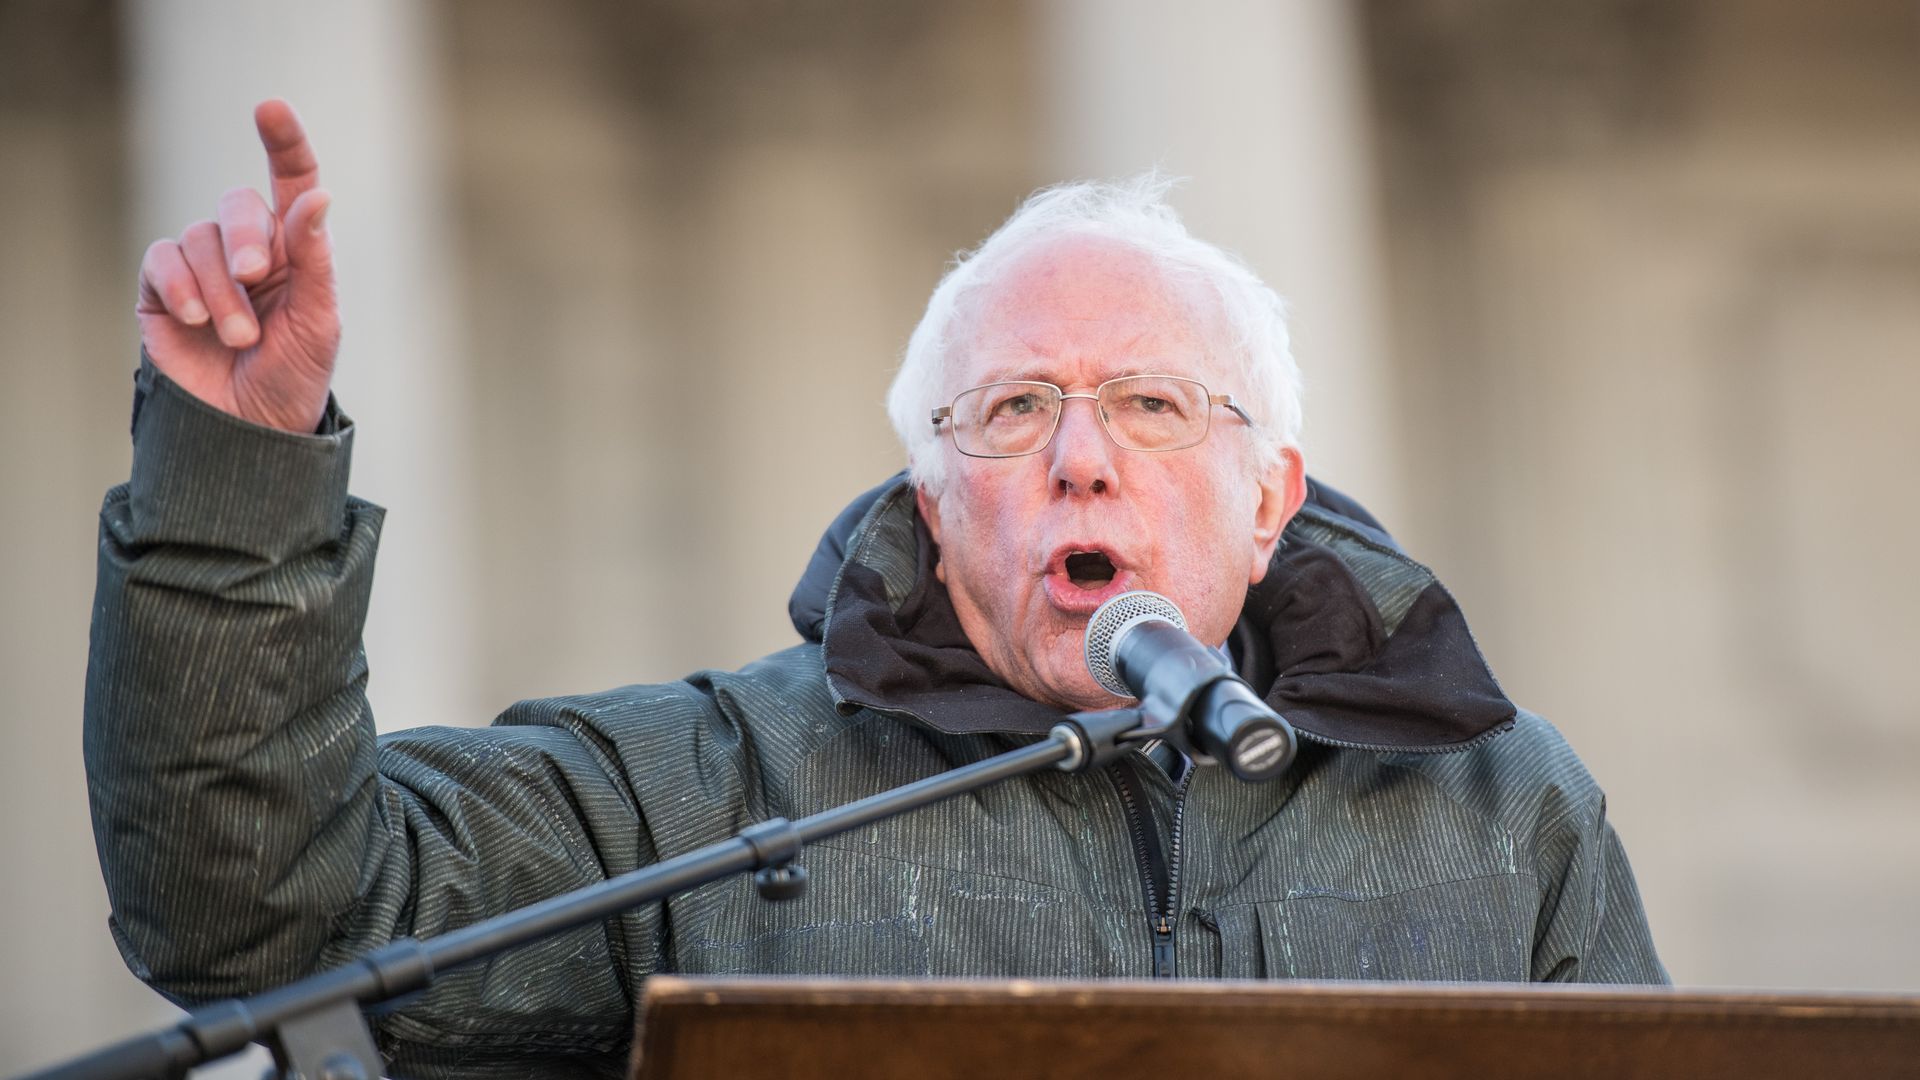 This is a photo of Bernie Sanders giving a speech and pointing in the air